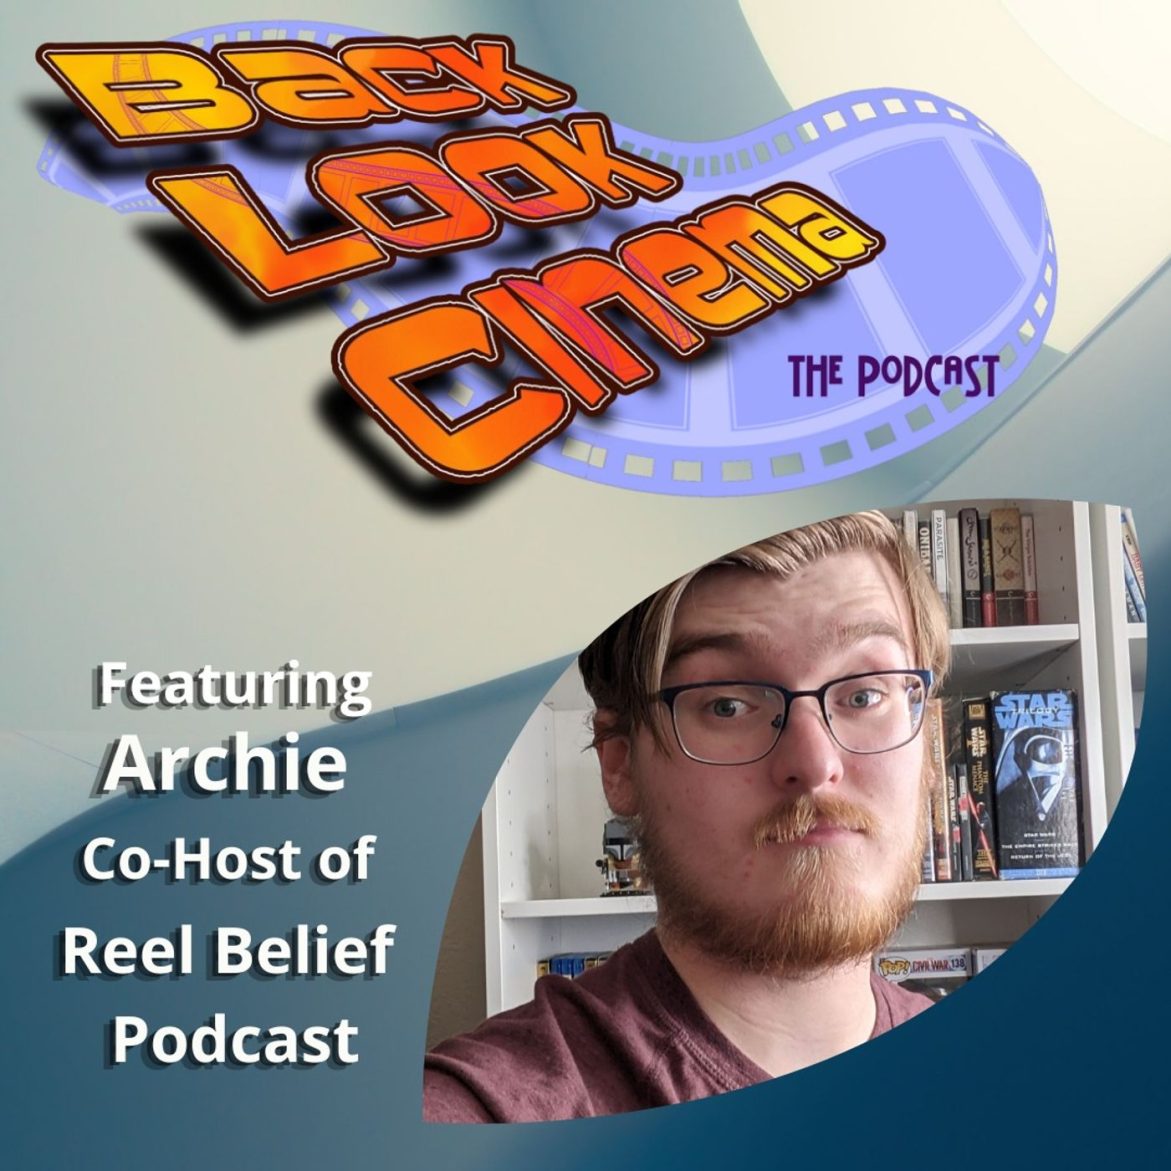 Black Podcasting - Ep. 57: Last Action Hero (Featuring Archie S. Atkinson of the Reel Belief Podcast)